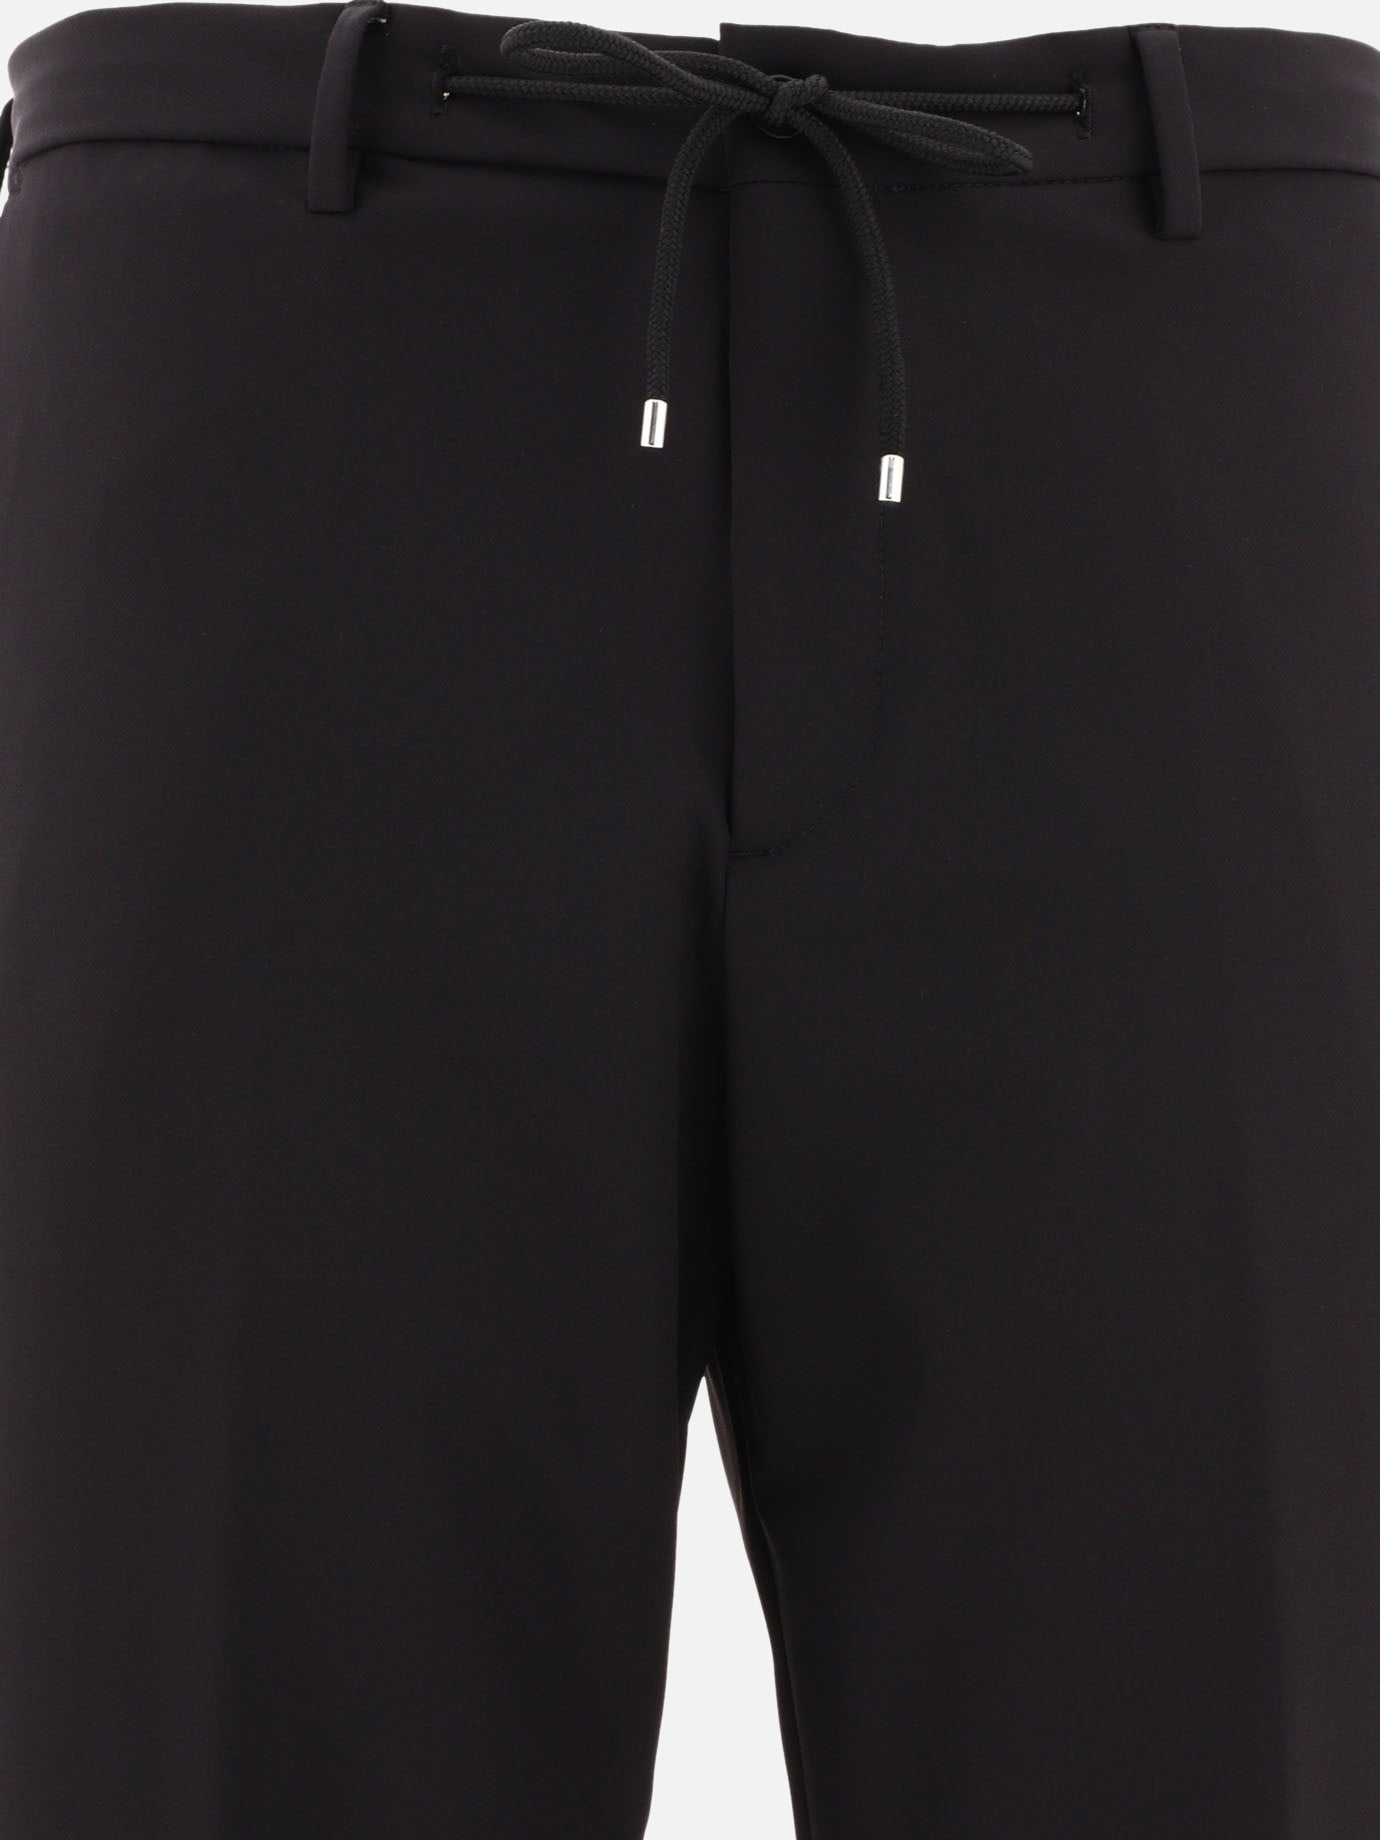 "Montreal Performance" trousers